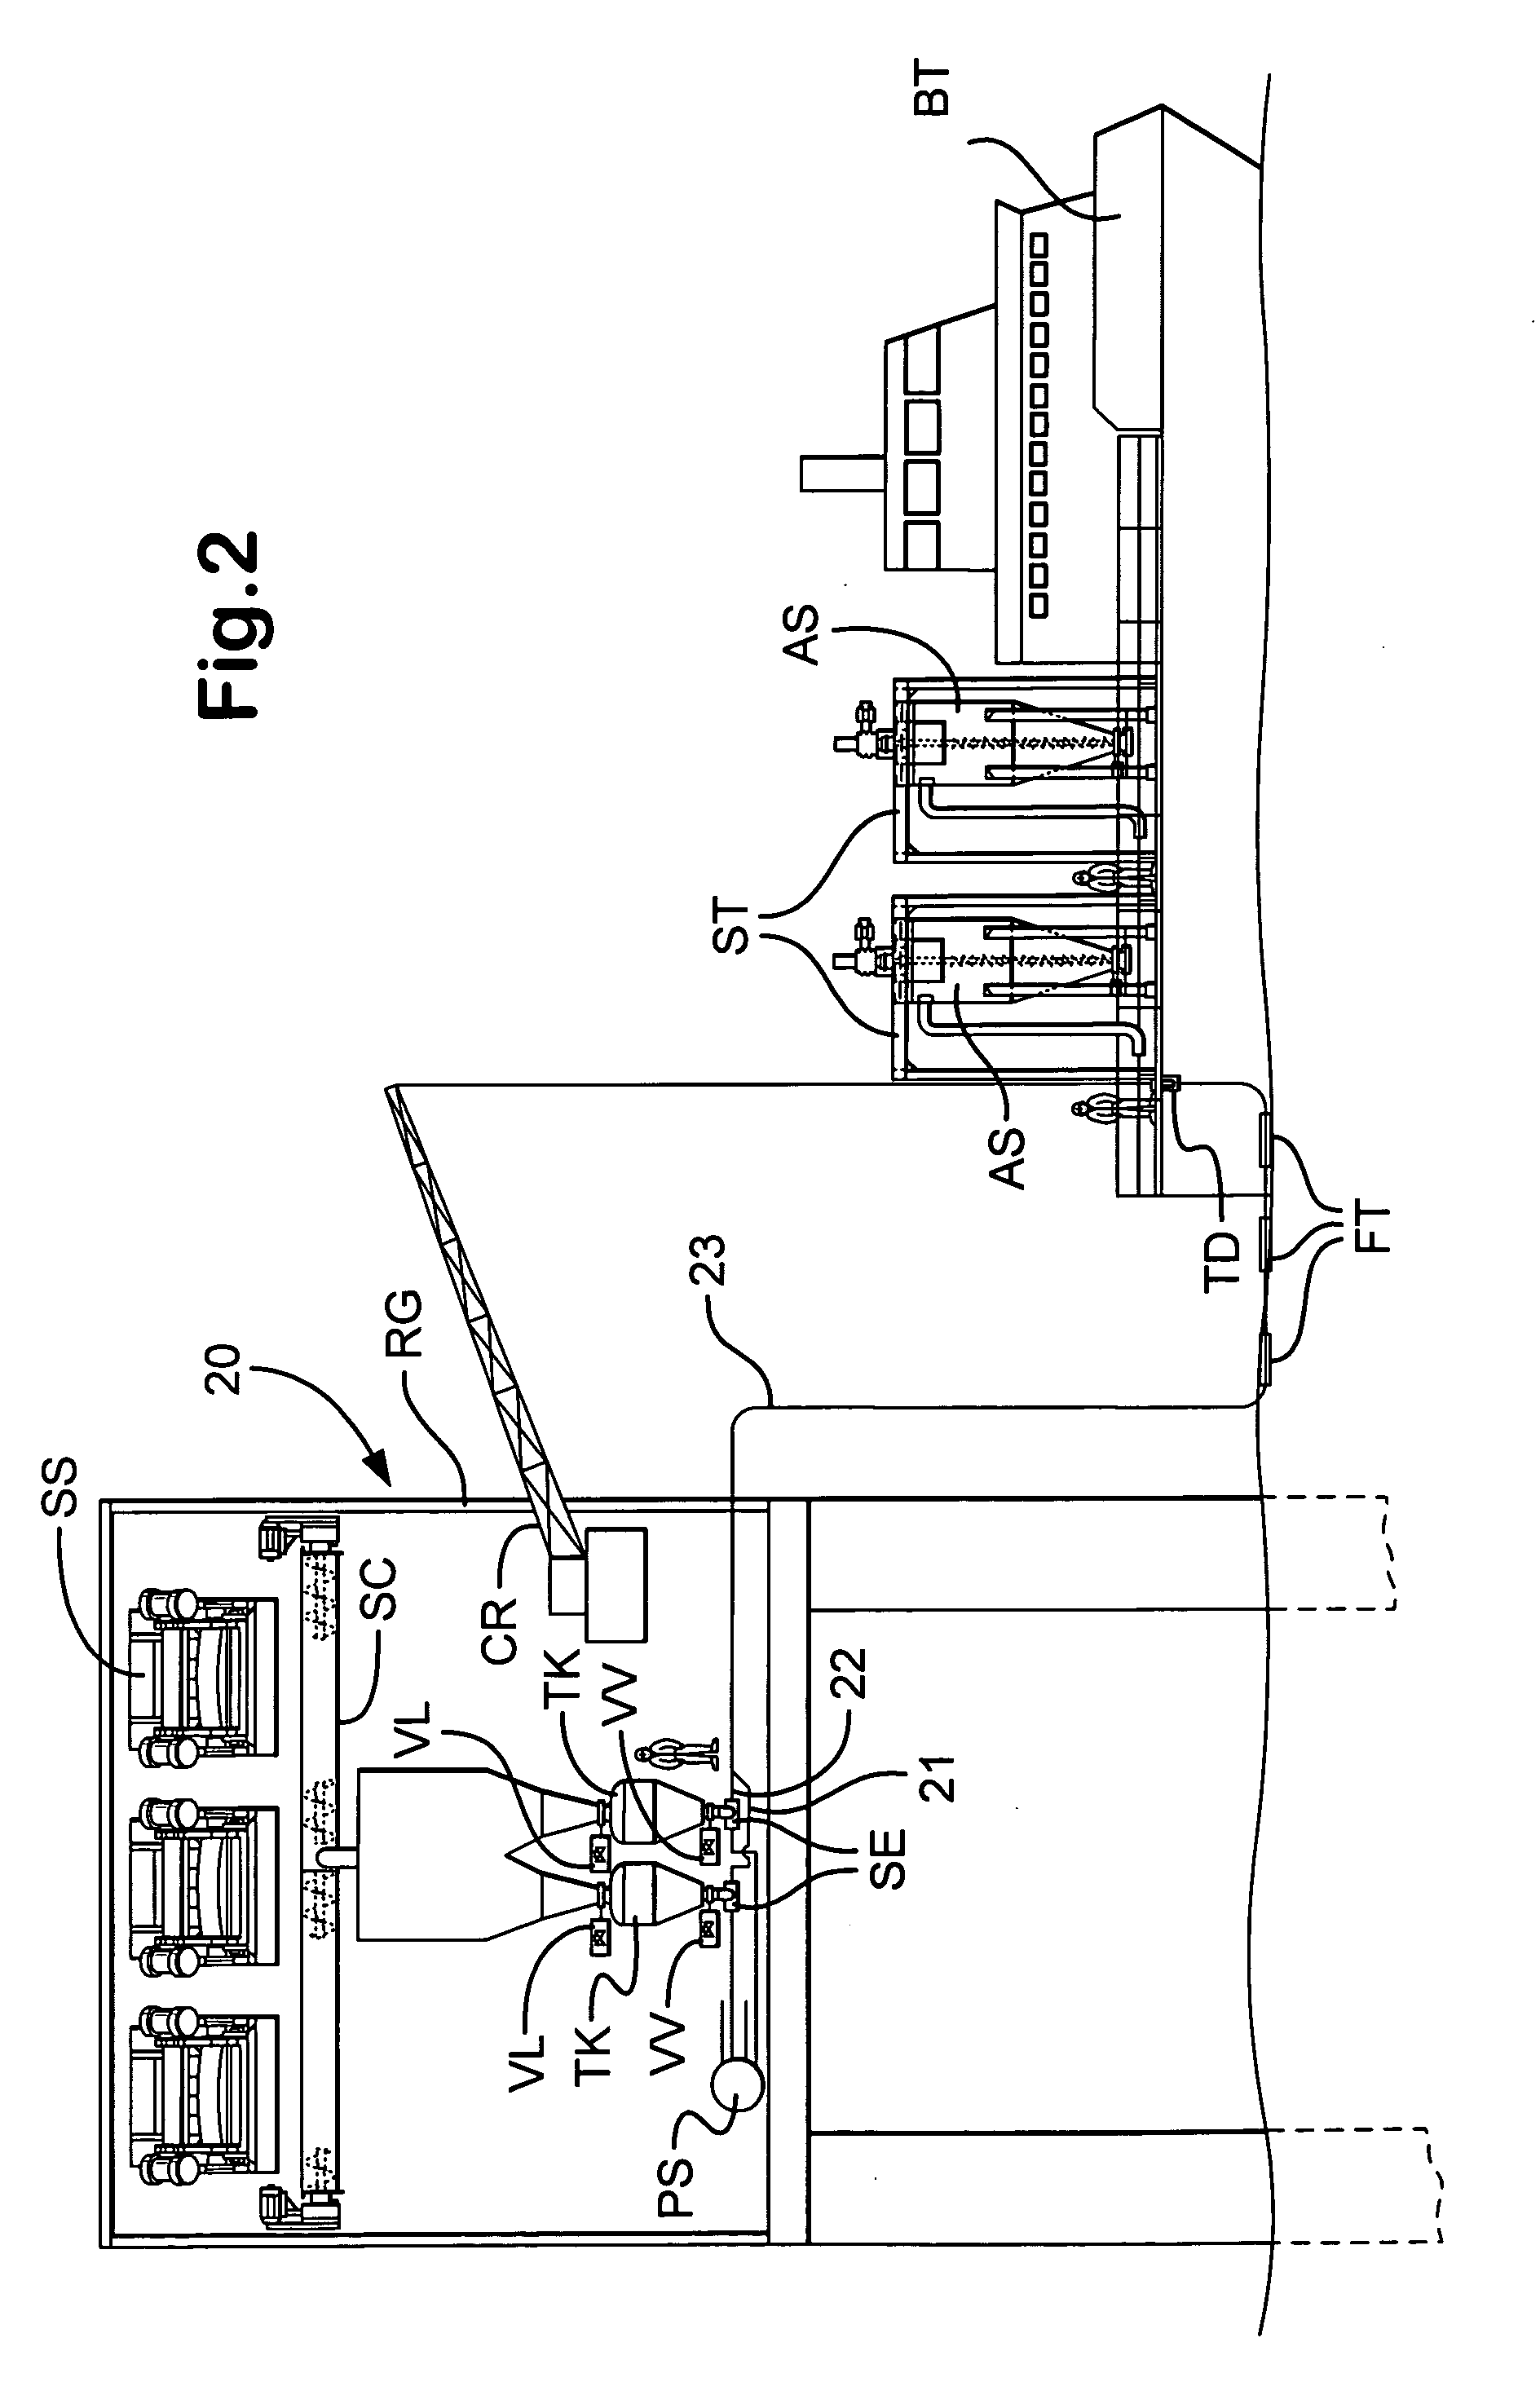 Drill cuttings conveyance systems and methods